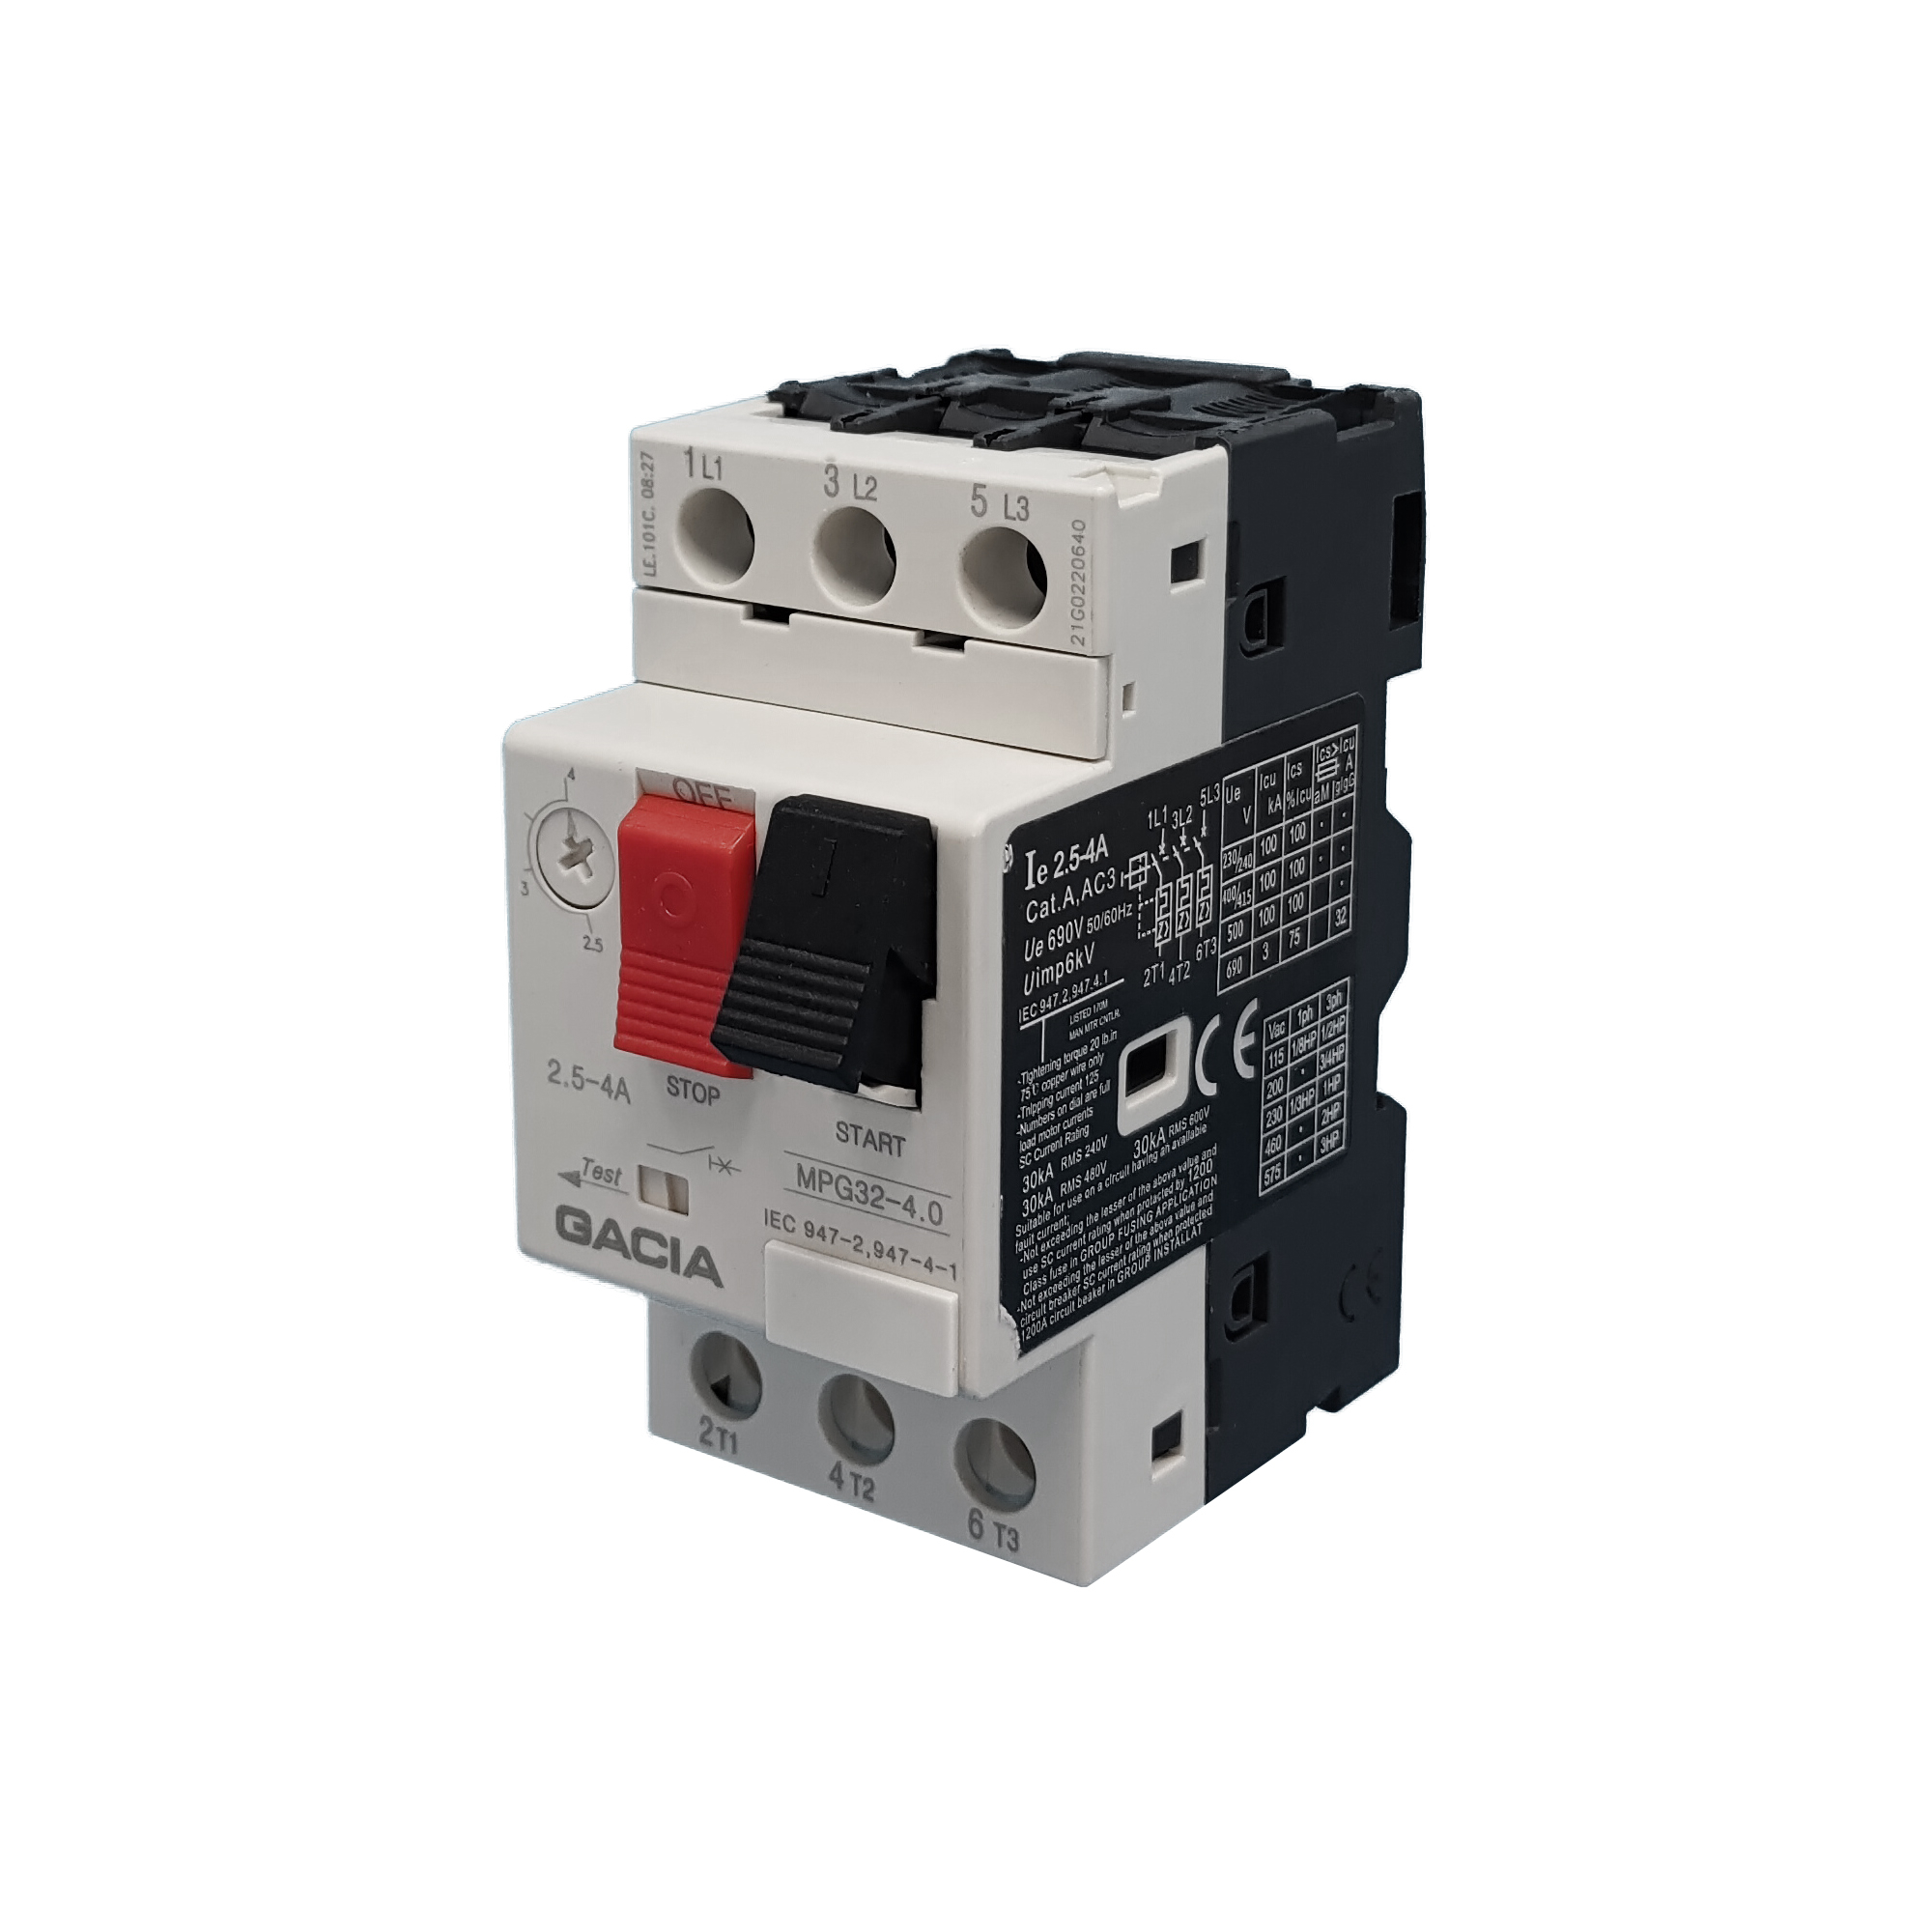 MPG32 20-25A motor protection circuit breaker